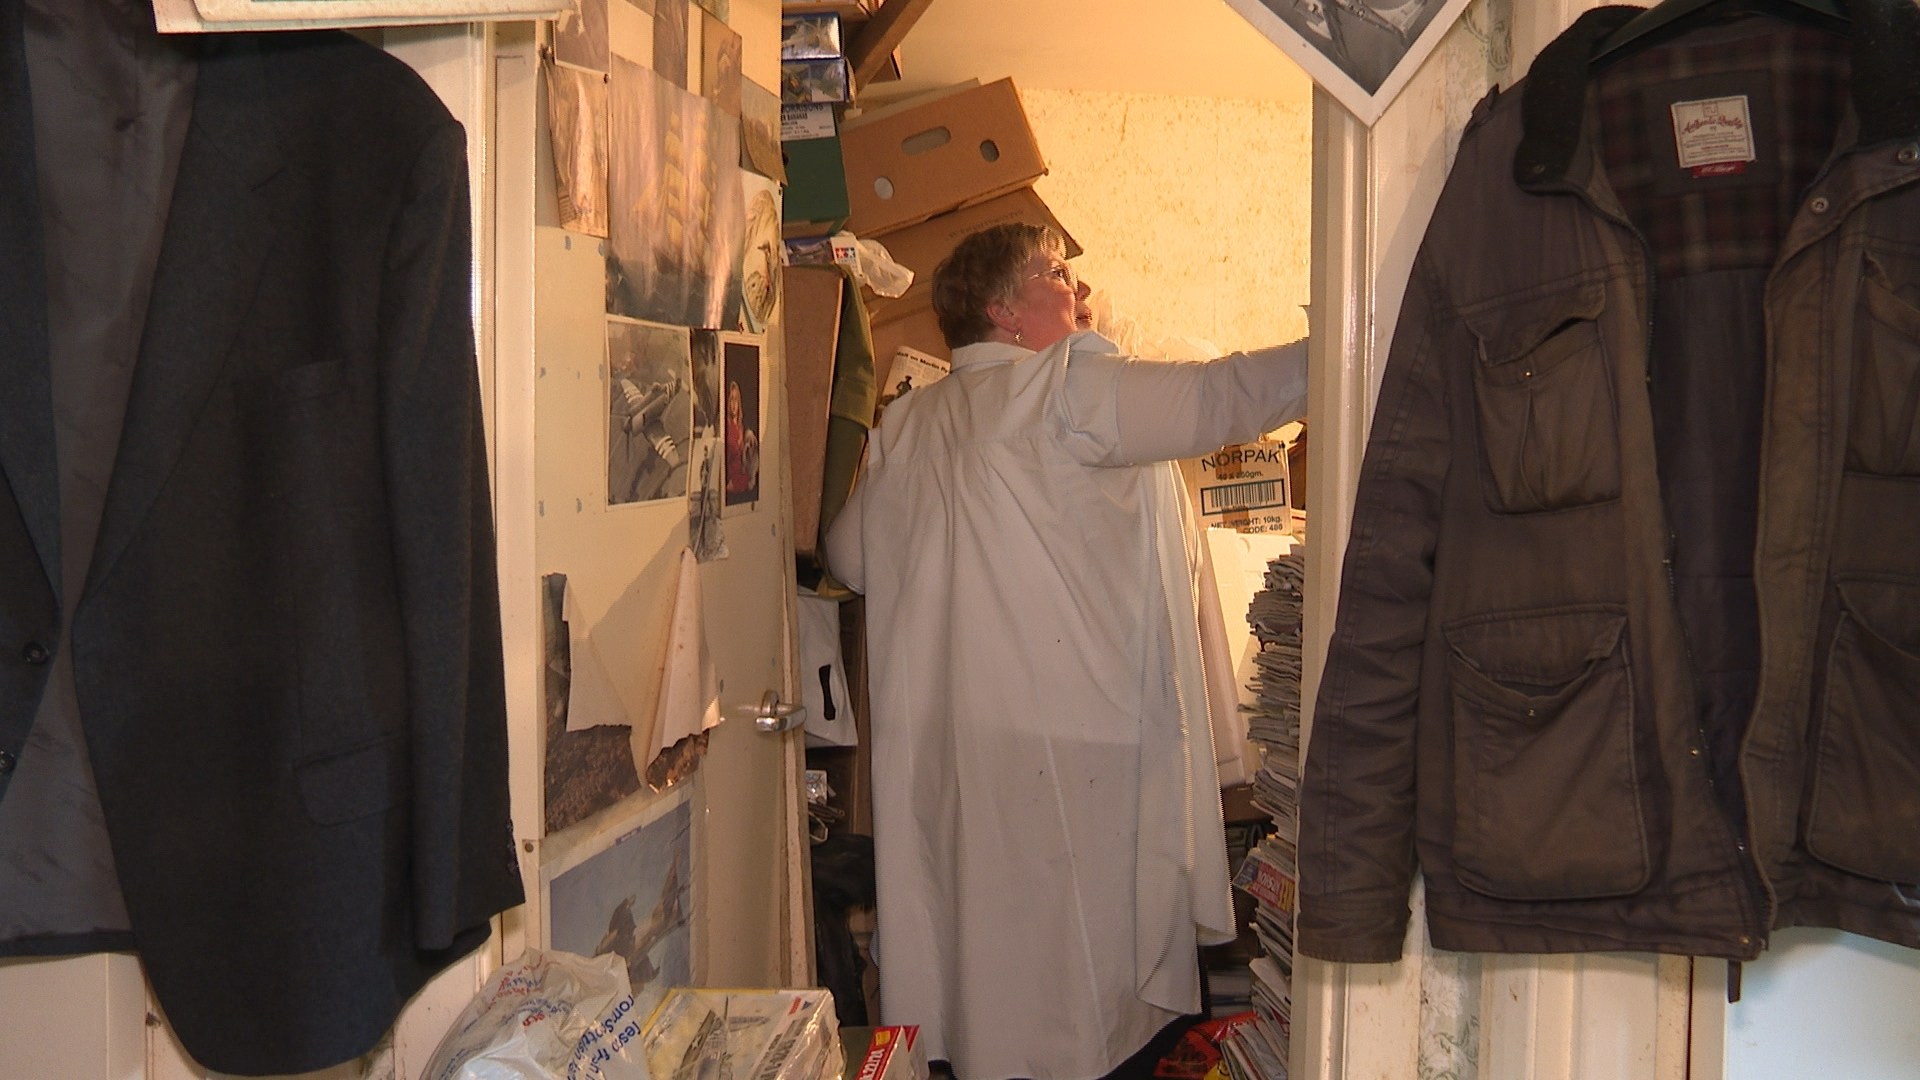 Linda Fay had spent years helping Ron to manage his hoarding disorder.